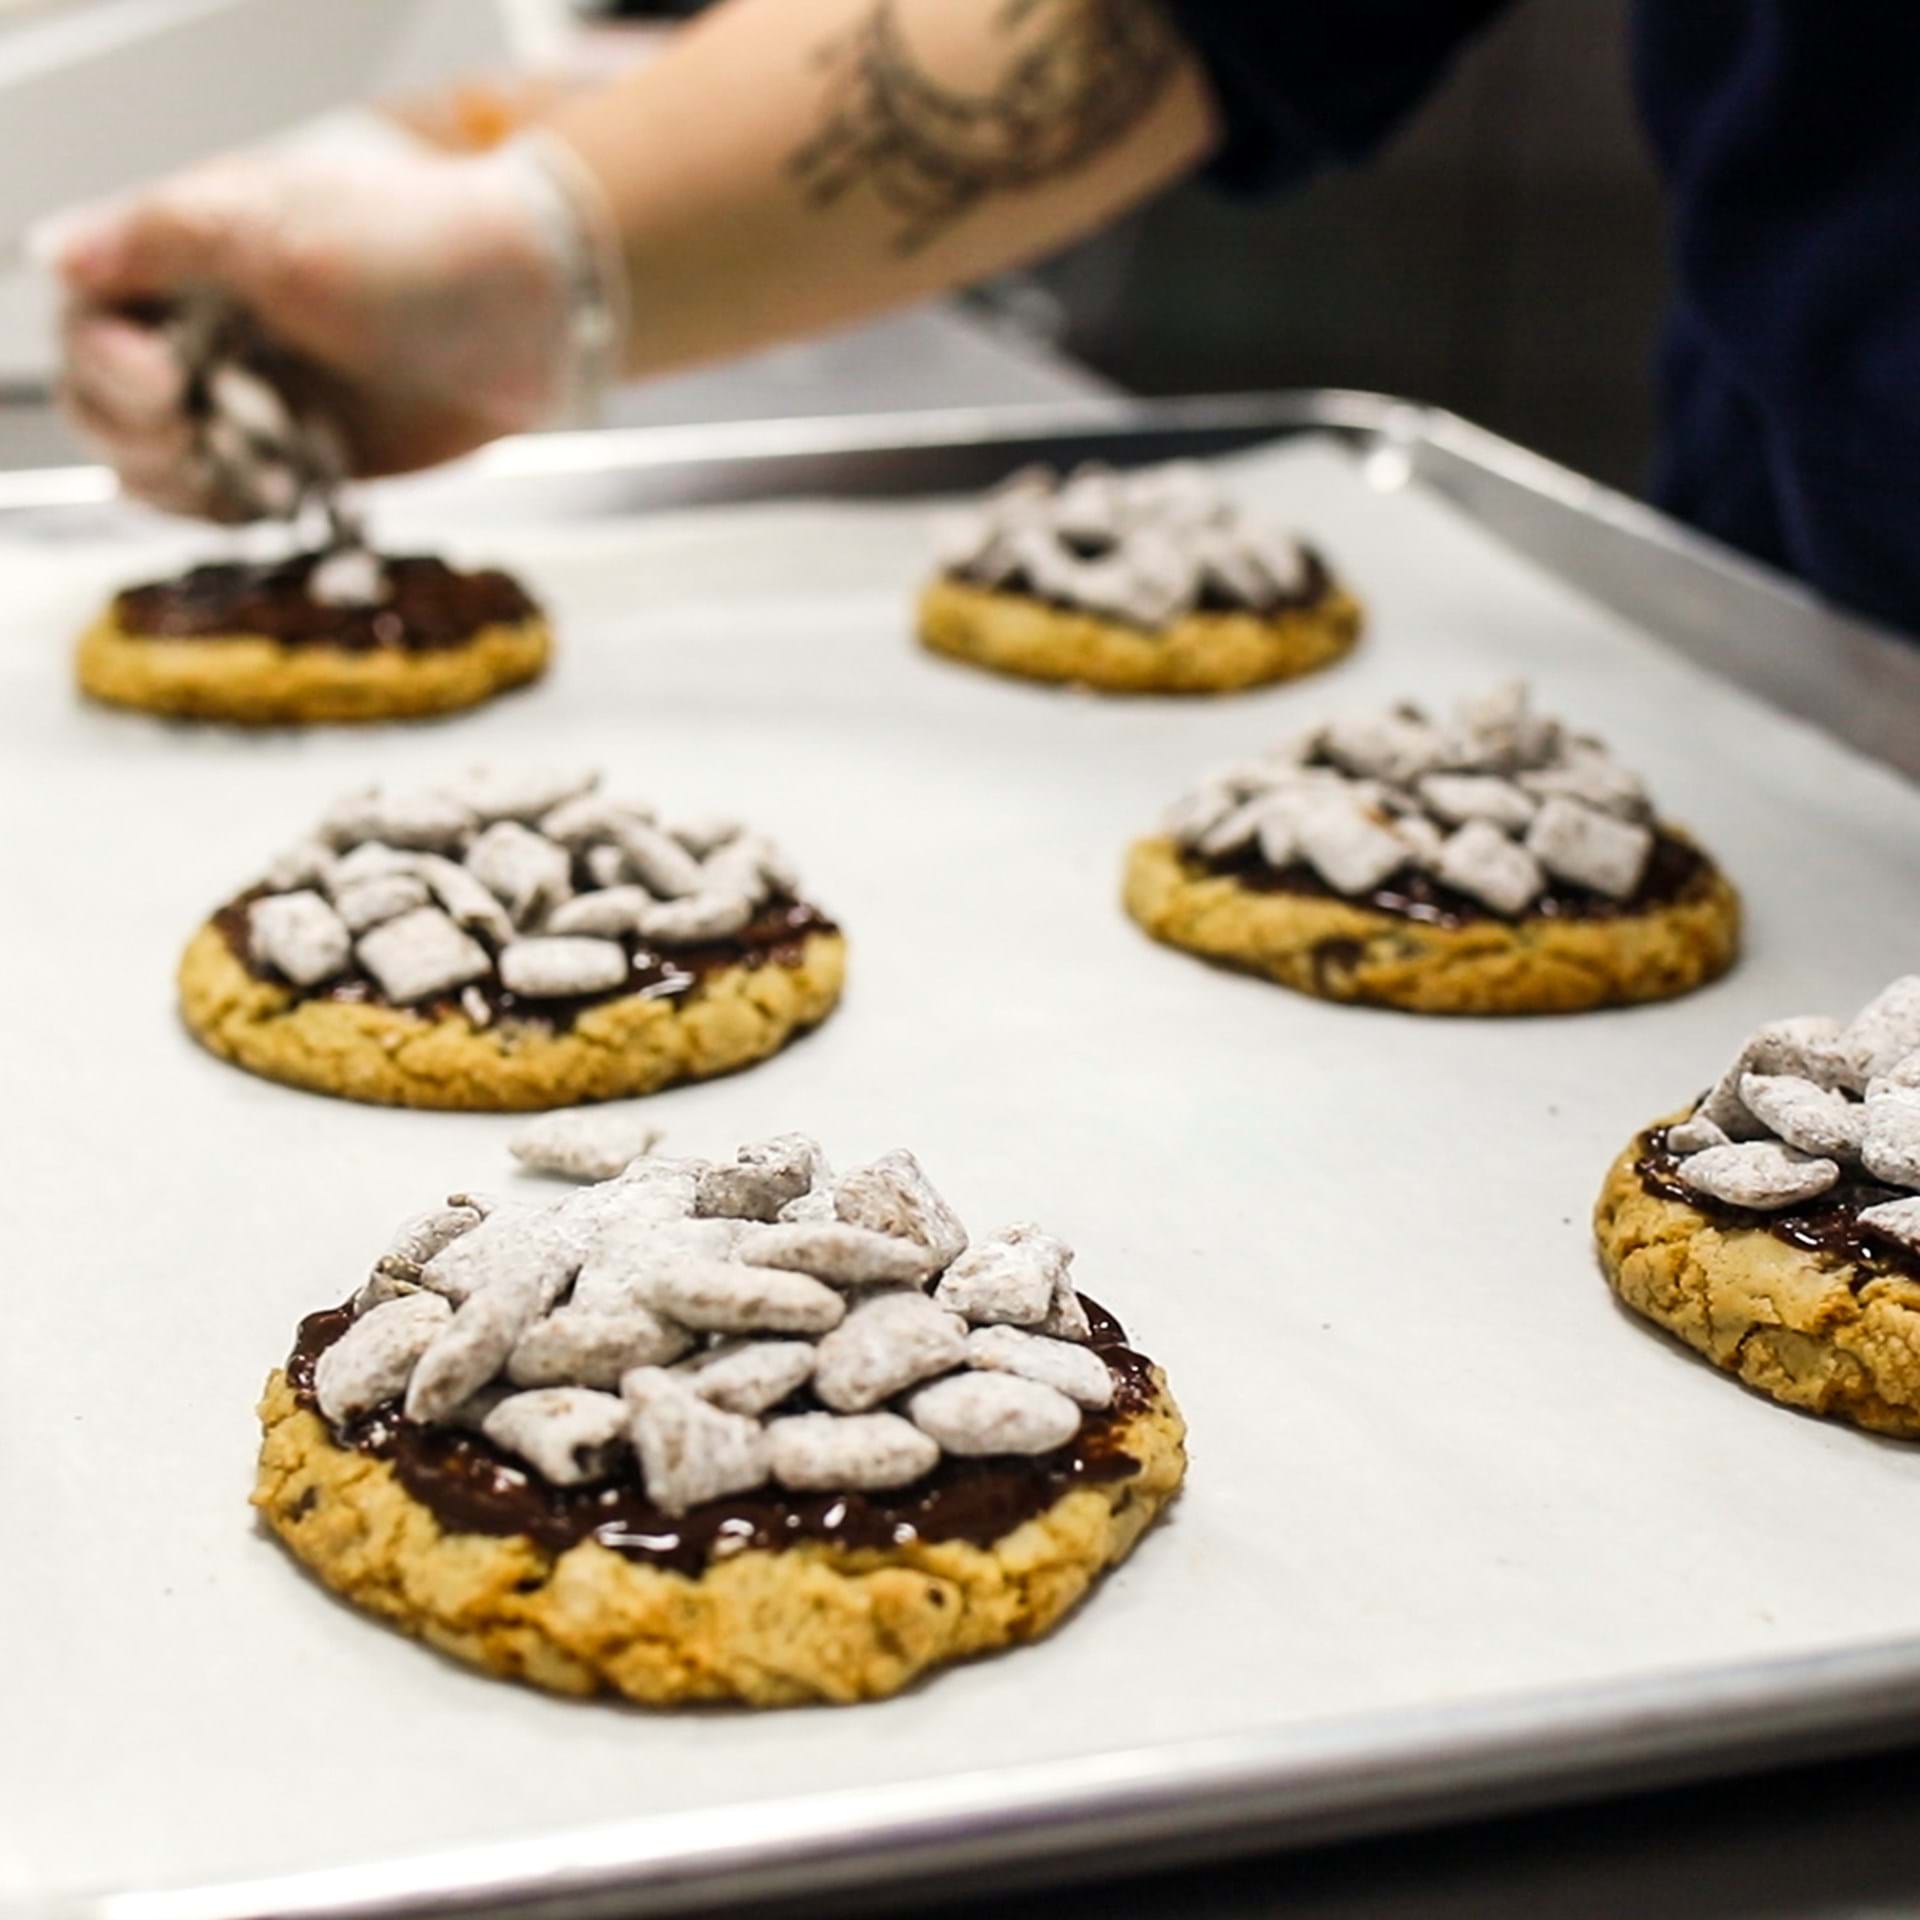 Our Signature Puppy Chow Cookie